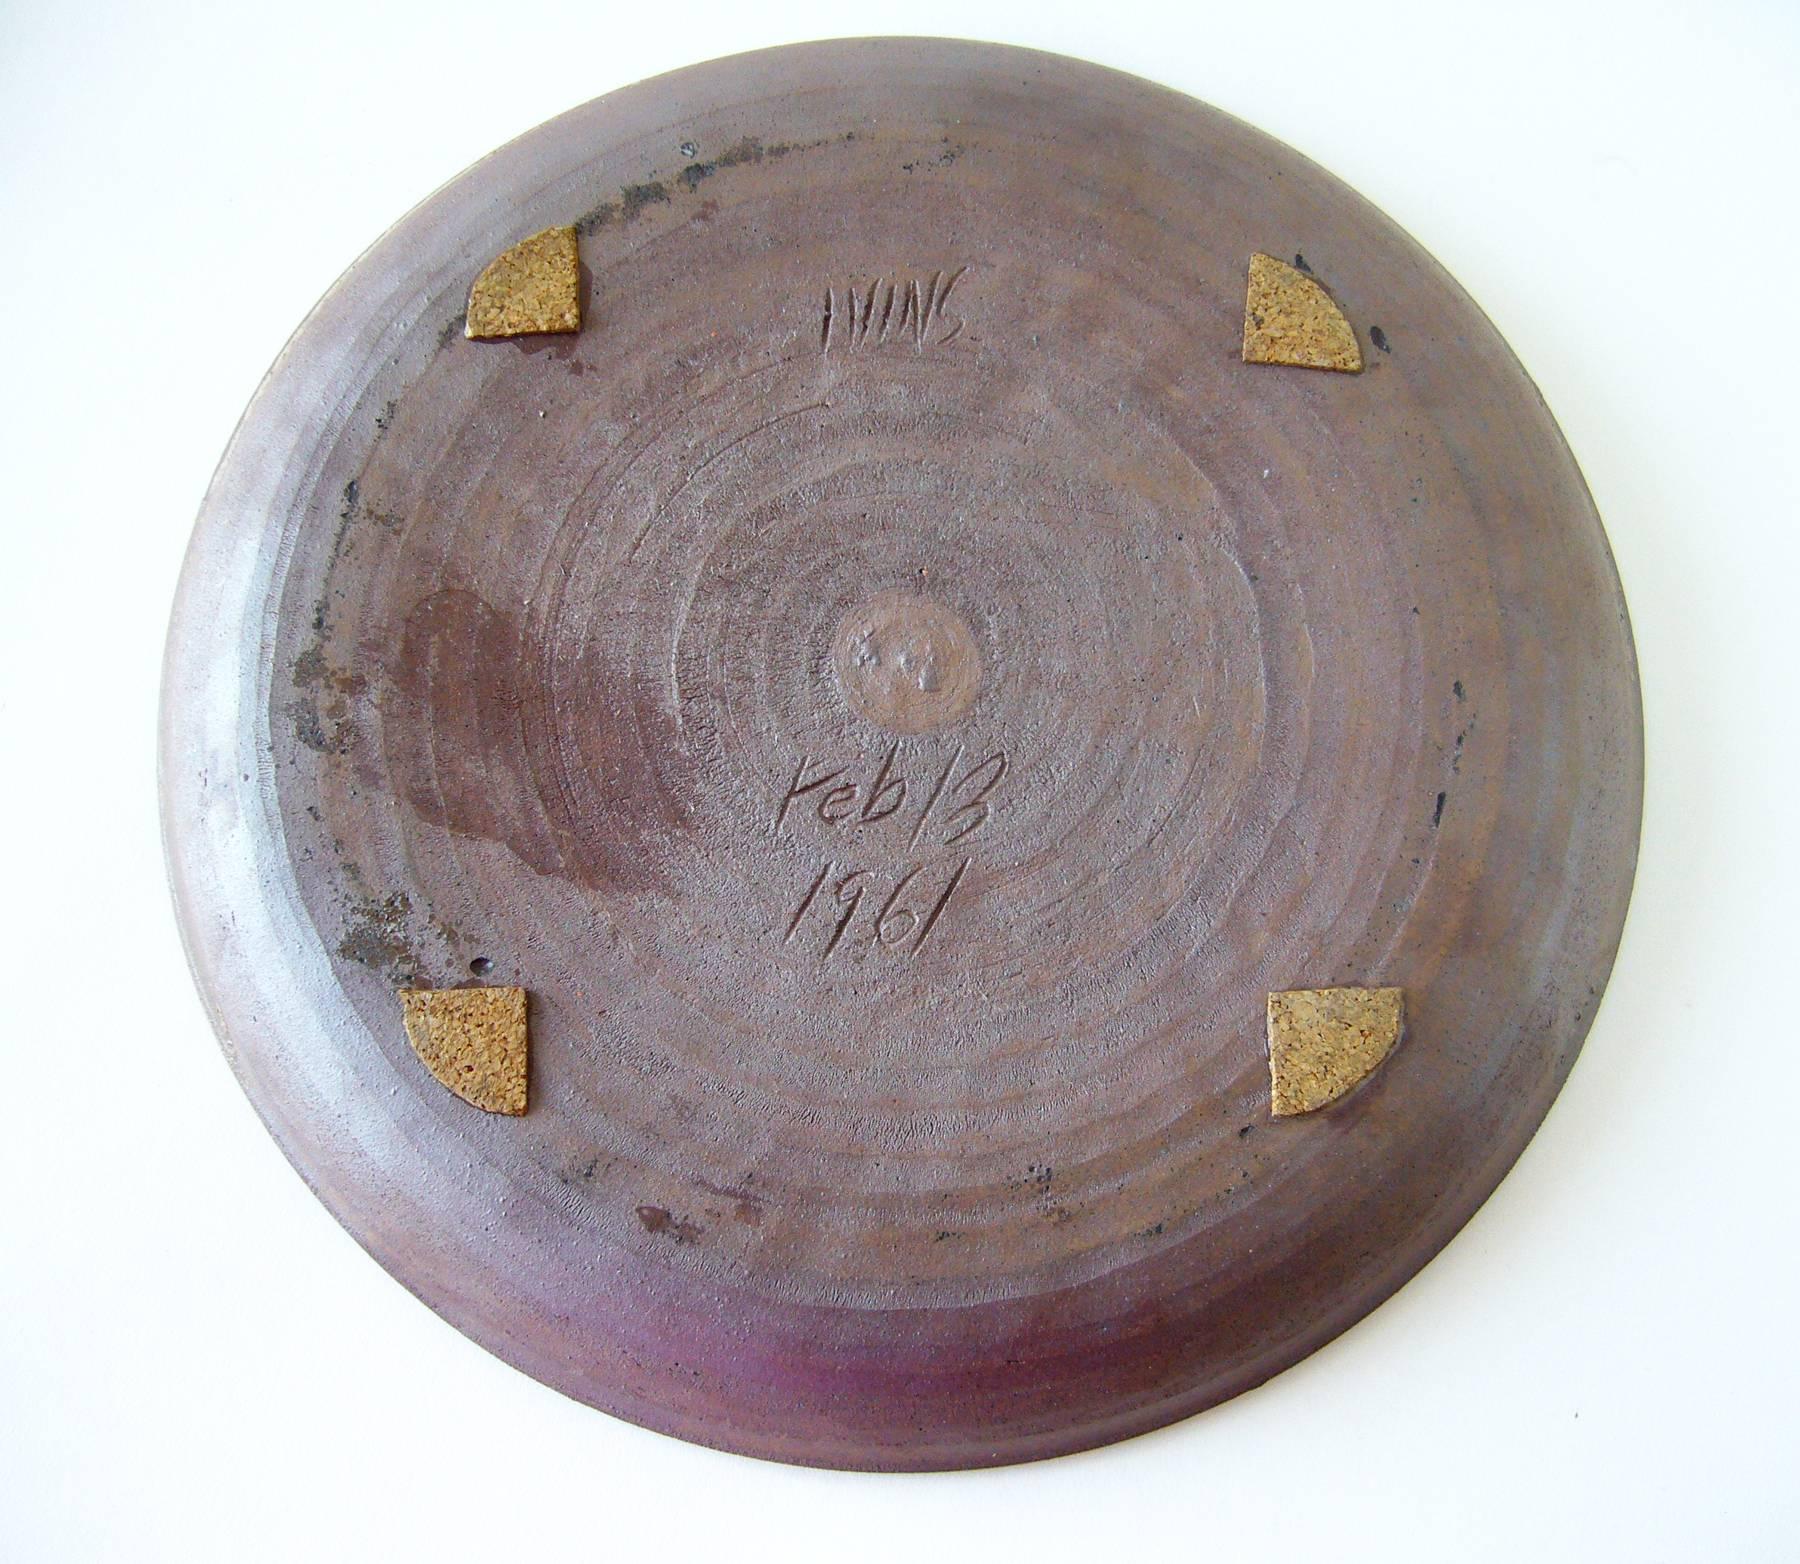 Stoneware platter with lava crater glaze created by California studio potter, Anthony Ivins. Platter measures 11.5